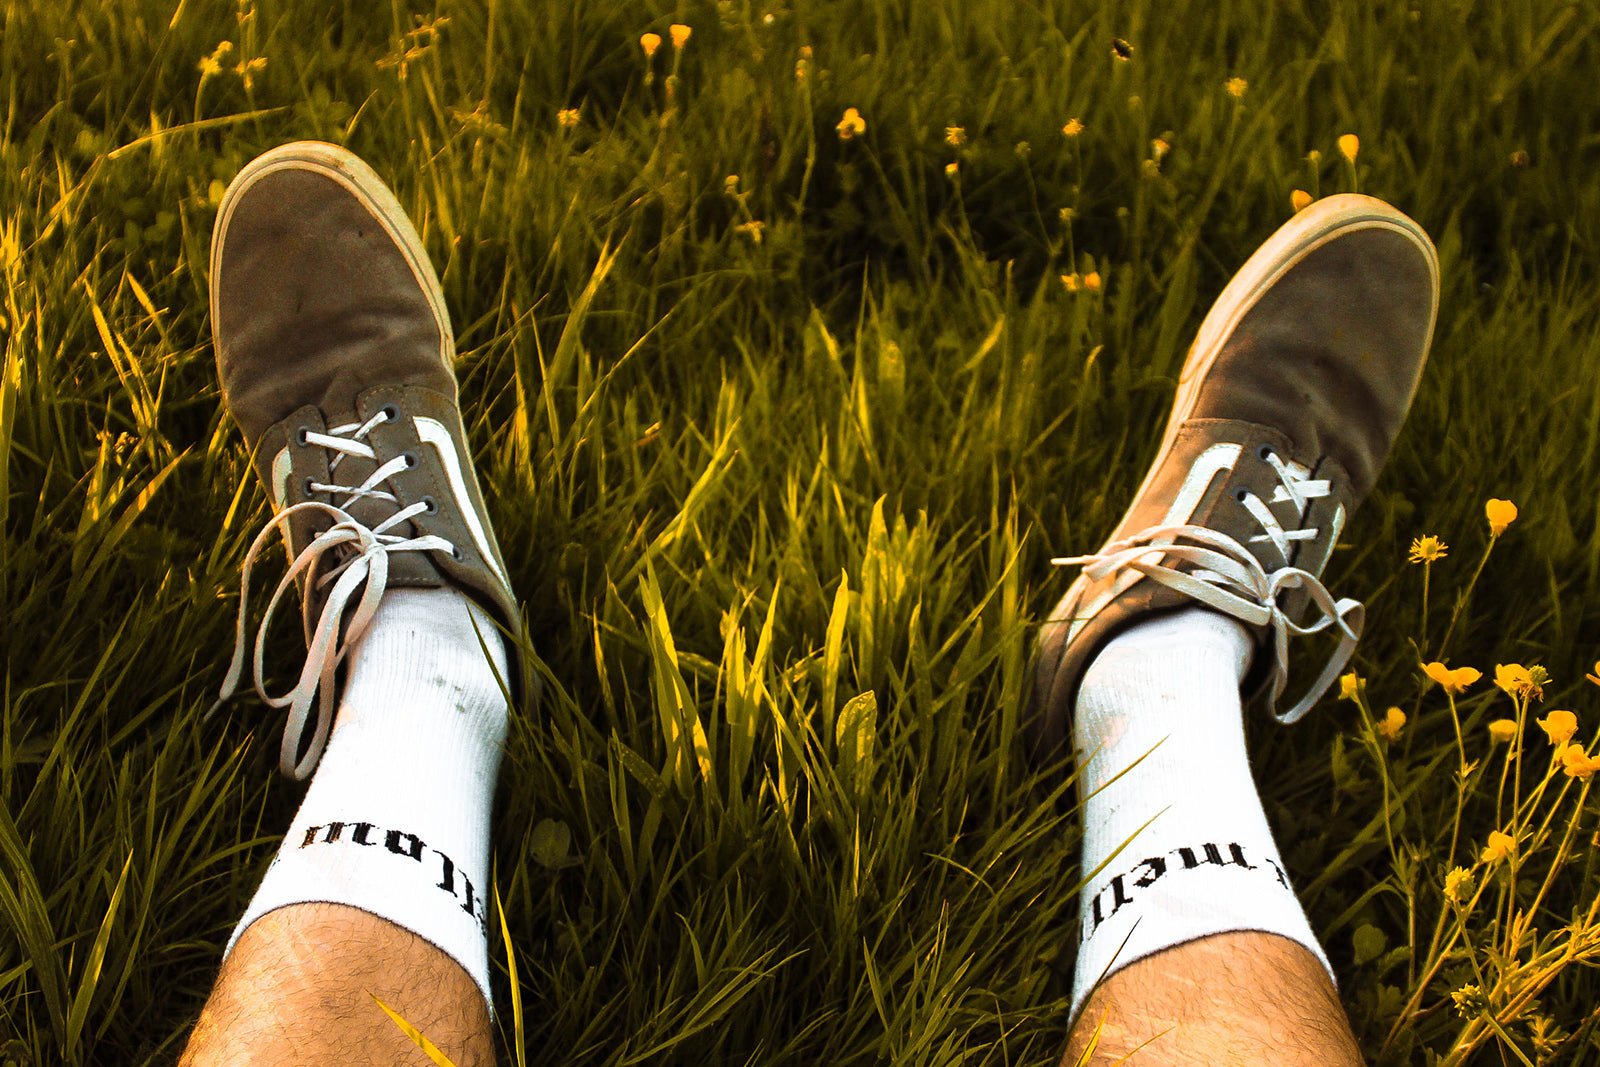 Selfshot image of a mans feet in green grass with yellow flowers